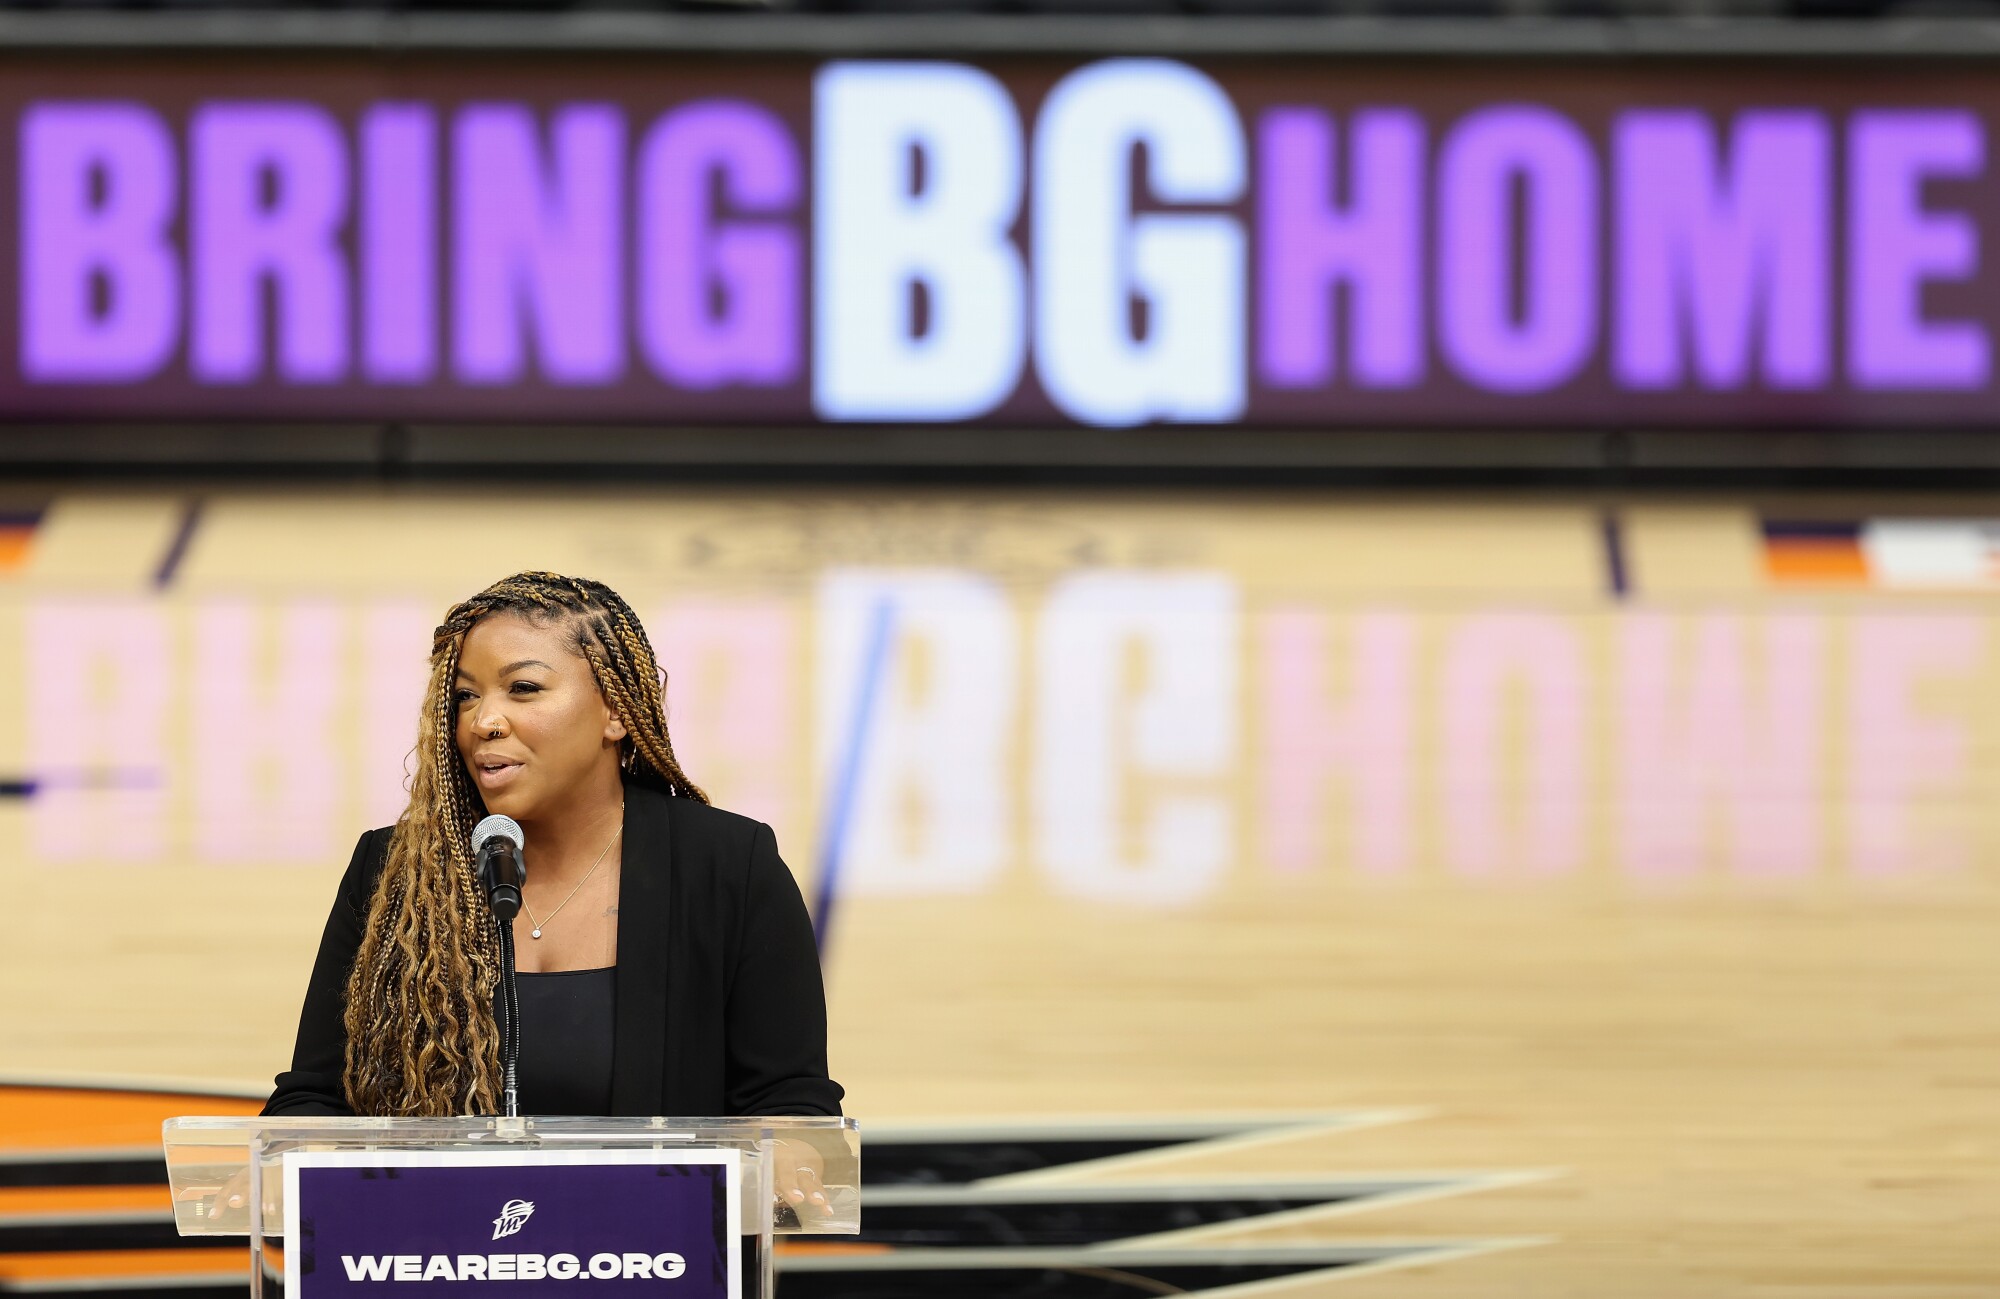 Cherell Griner, wife of Britney Griner, speaks during a rally to support the release of Britney Griner.